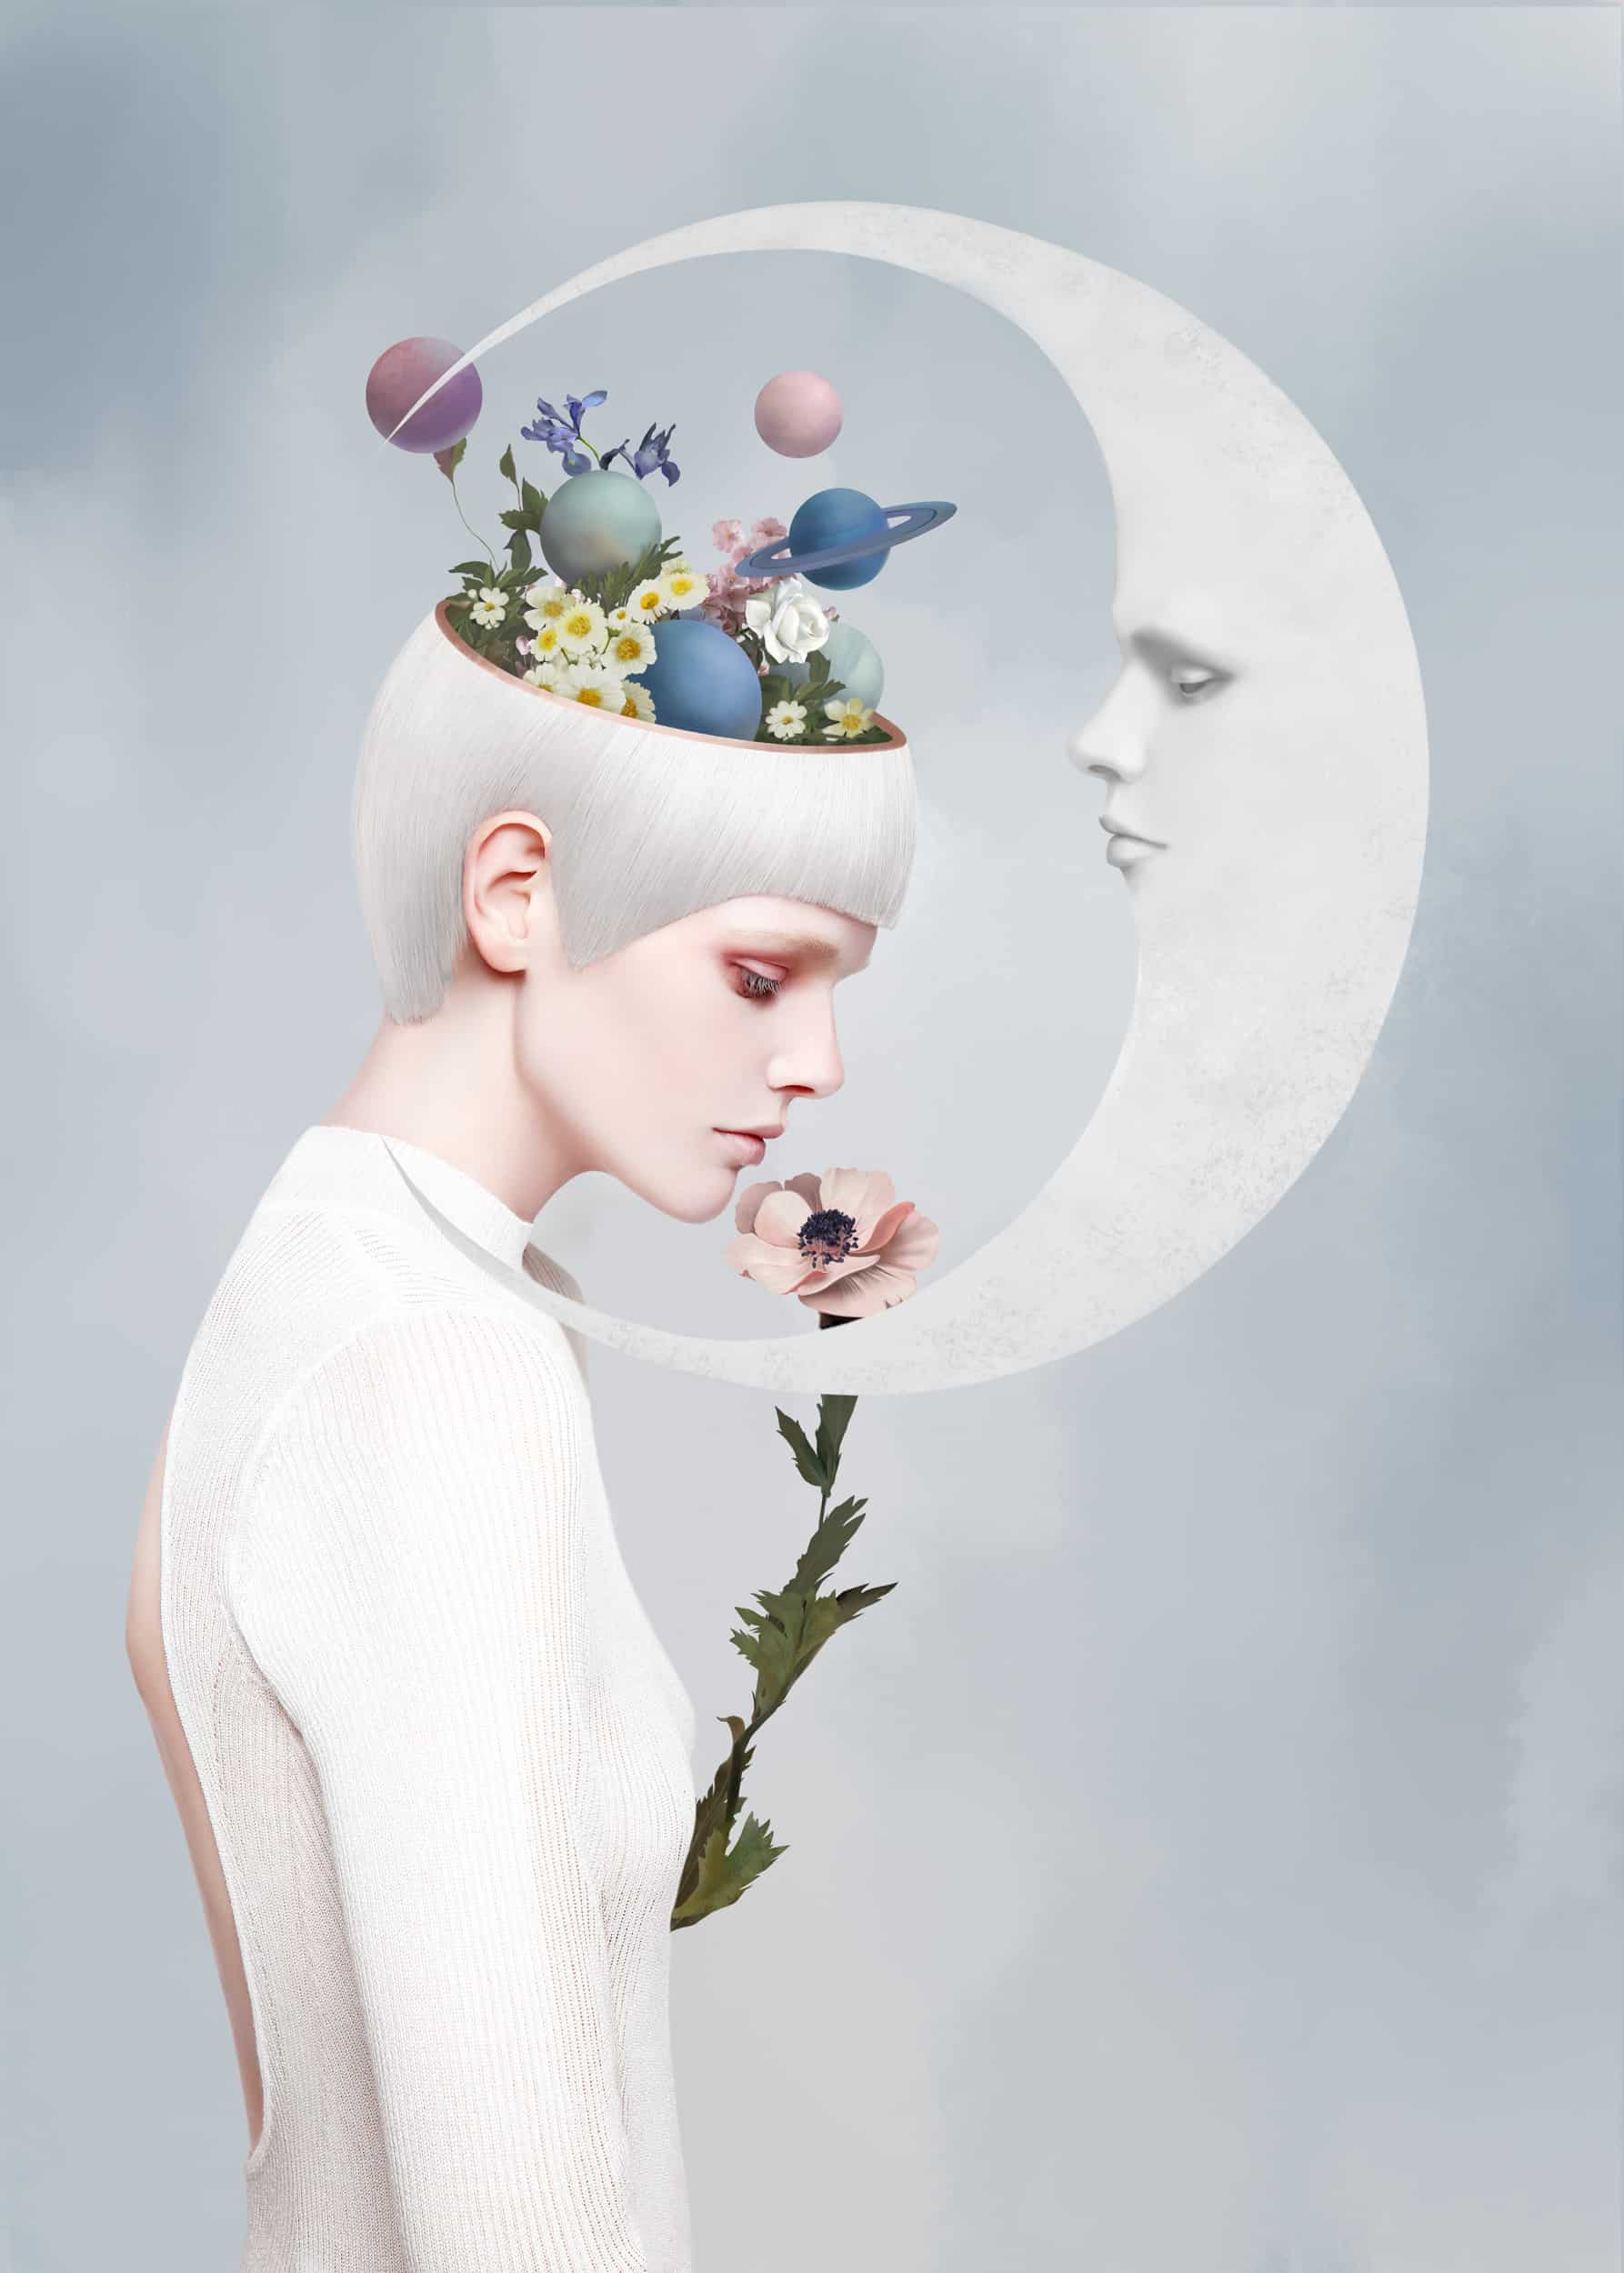 The artpiece 'Moon' by Yang Han shows a sideview of a woman, with flowers and planets coming out of her head, with the mmoon hugging her.